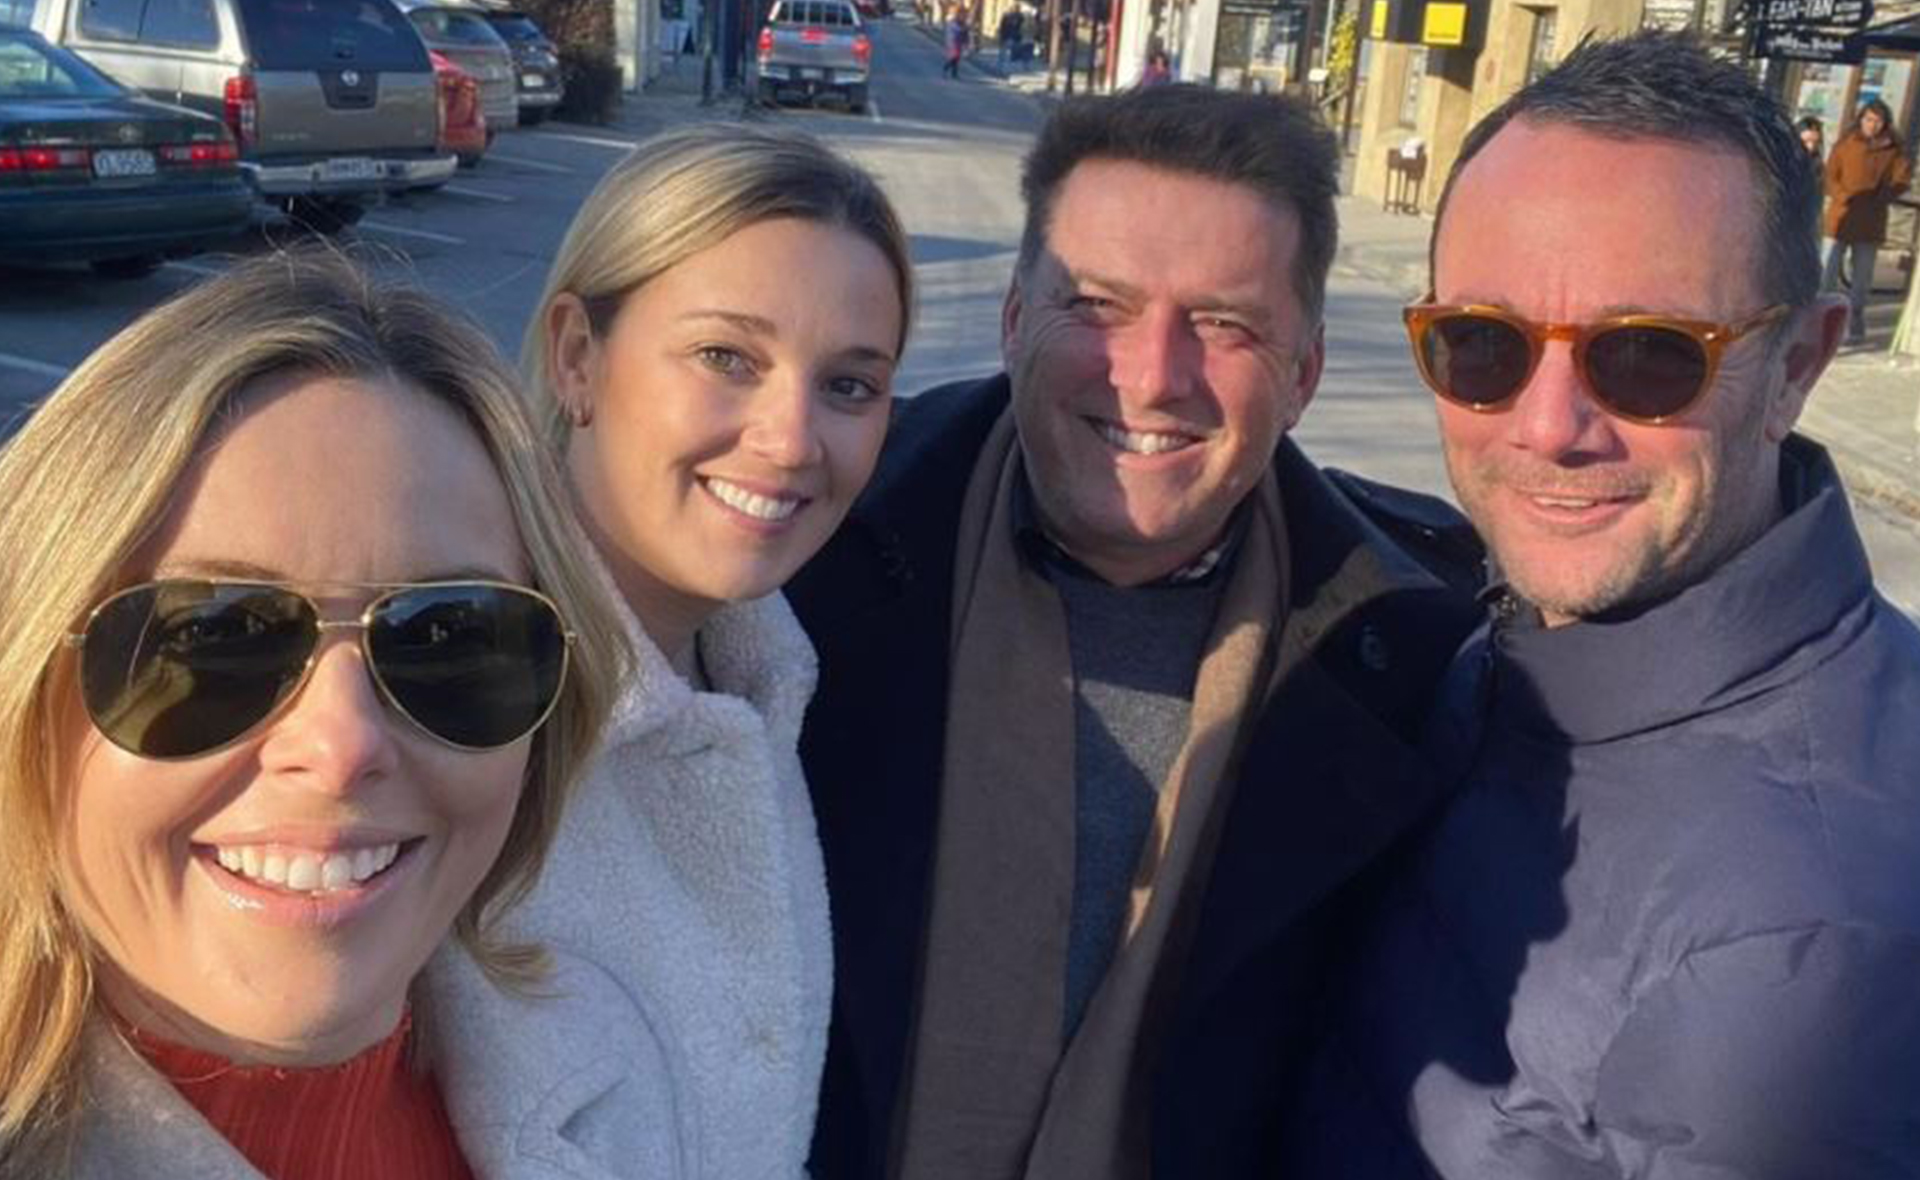 Today Show stars Karl Stefanovic and Ally Langdon just went on tour to New Zealand for the ultimate double date